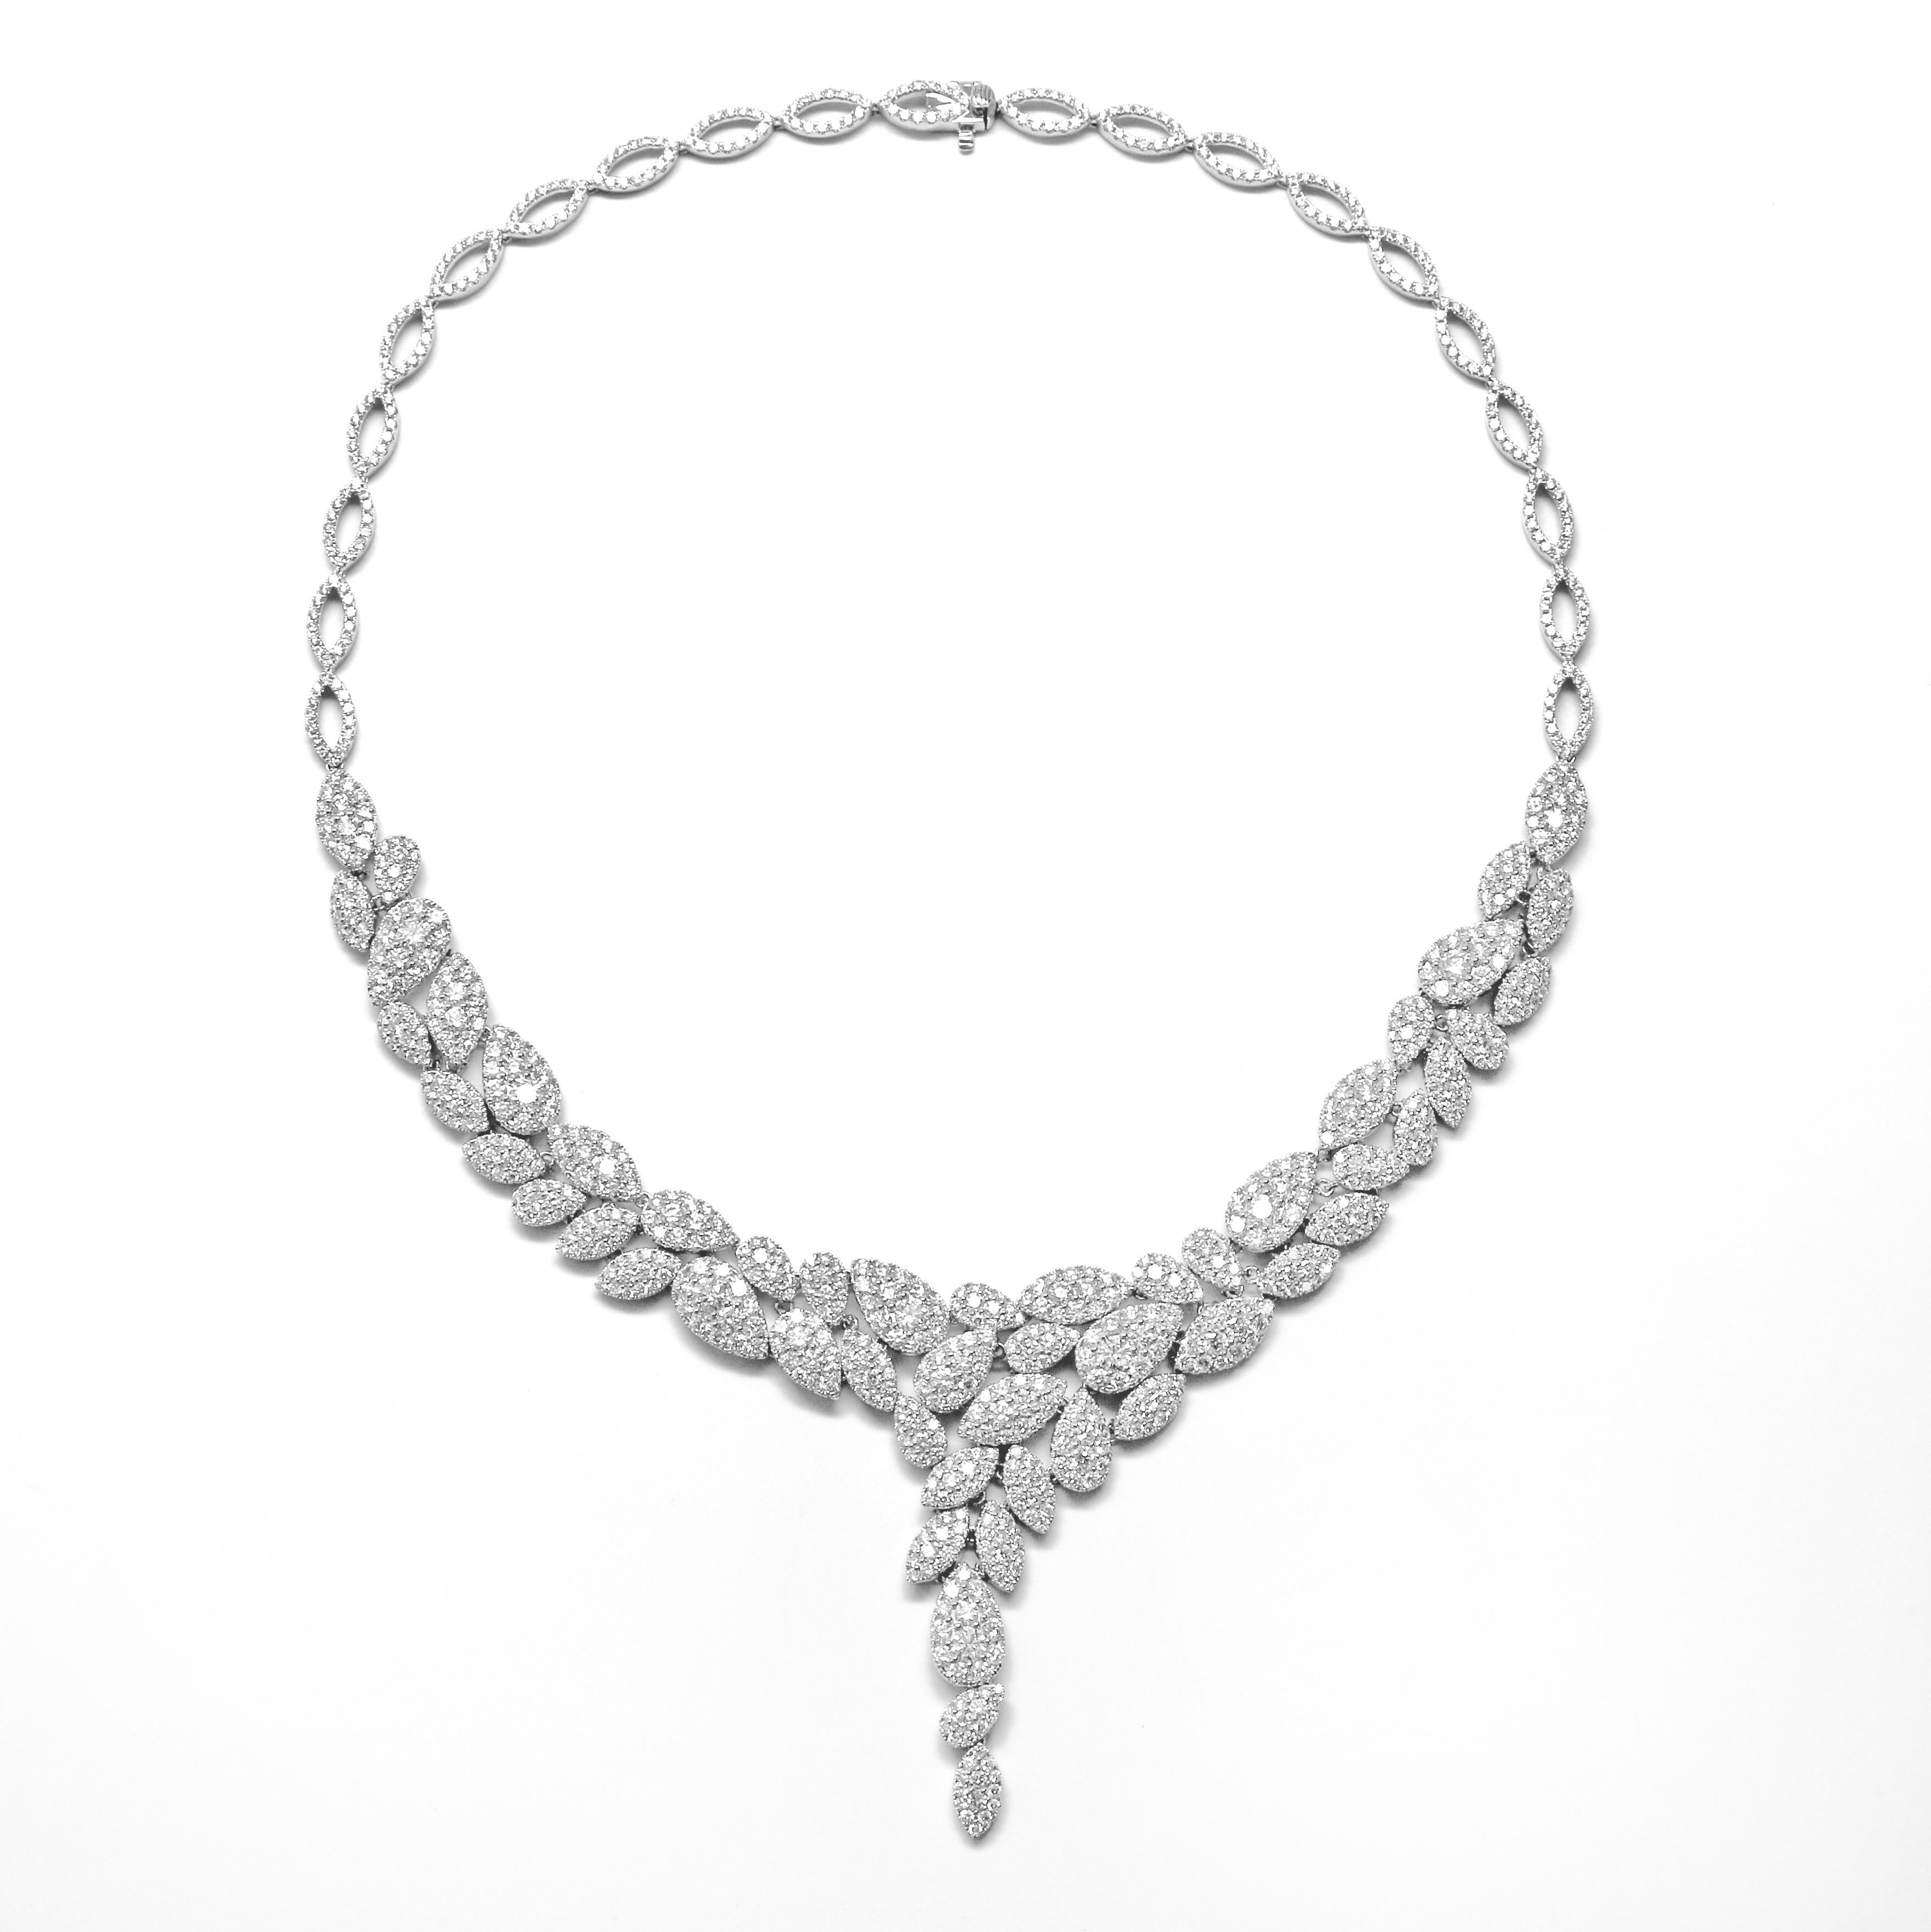 Contemporary Captivating 18KW Diamond Necklace - 22.08ct, G Color, SI1 Clarity For Sale